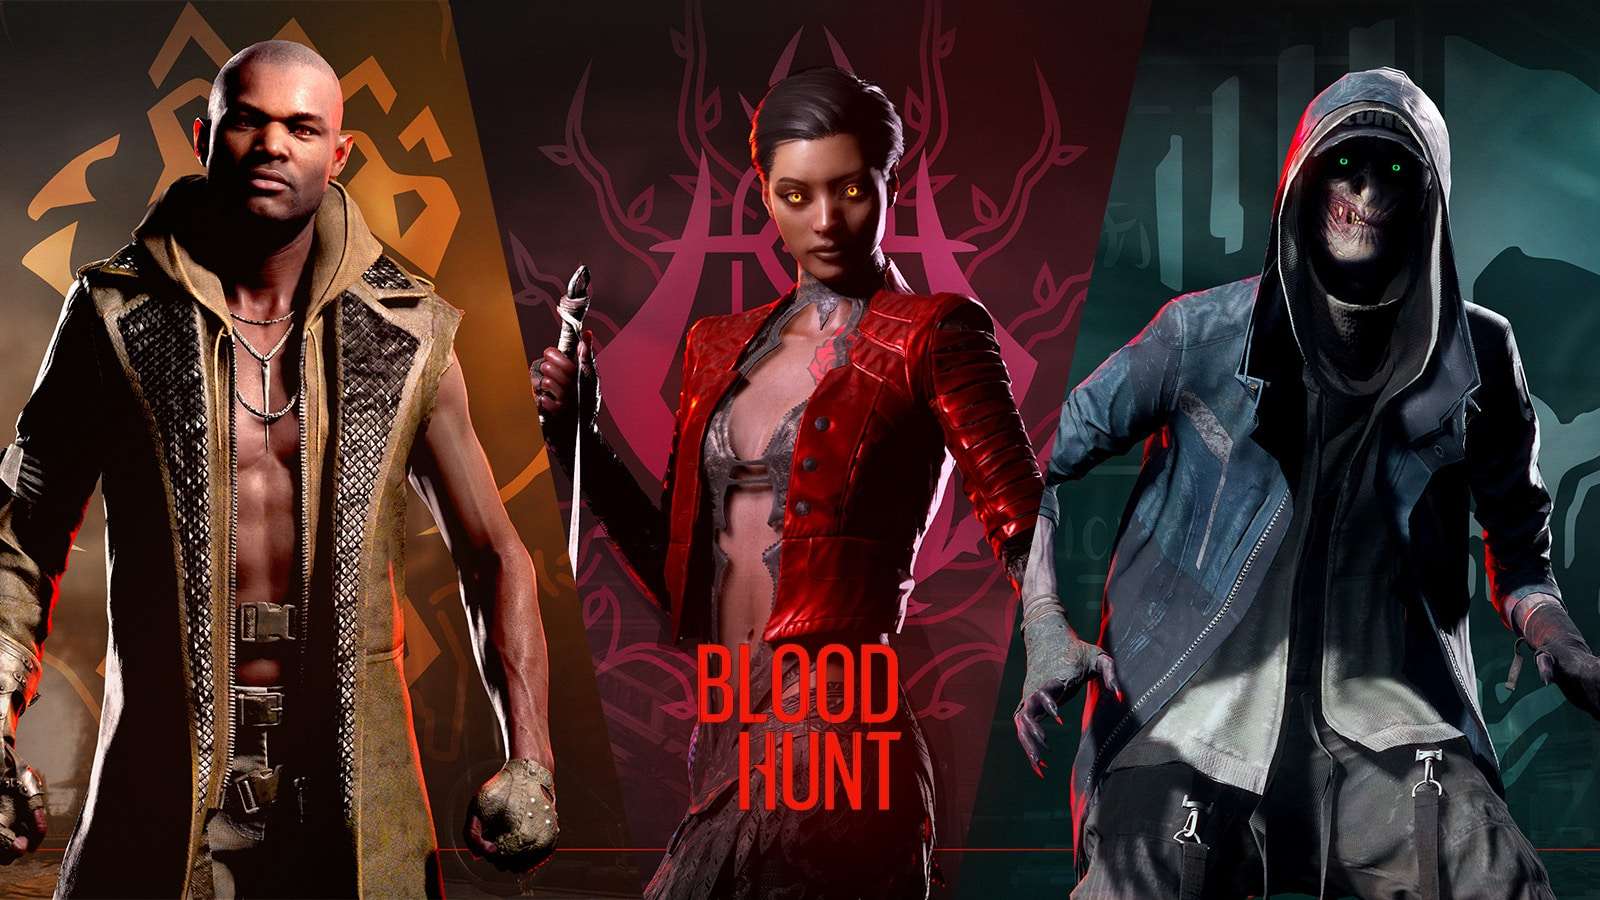 An image of three clans and archetypes in Bloodhunt